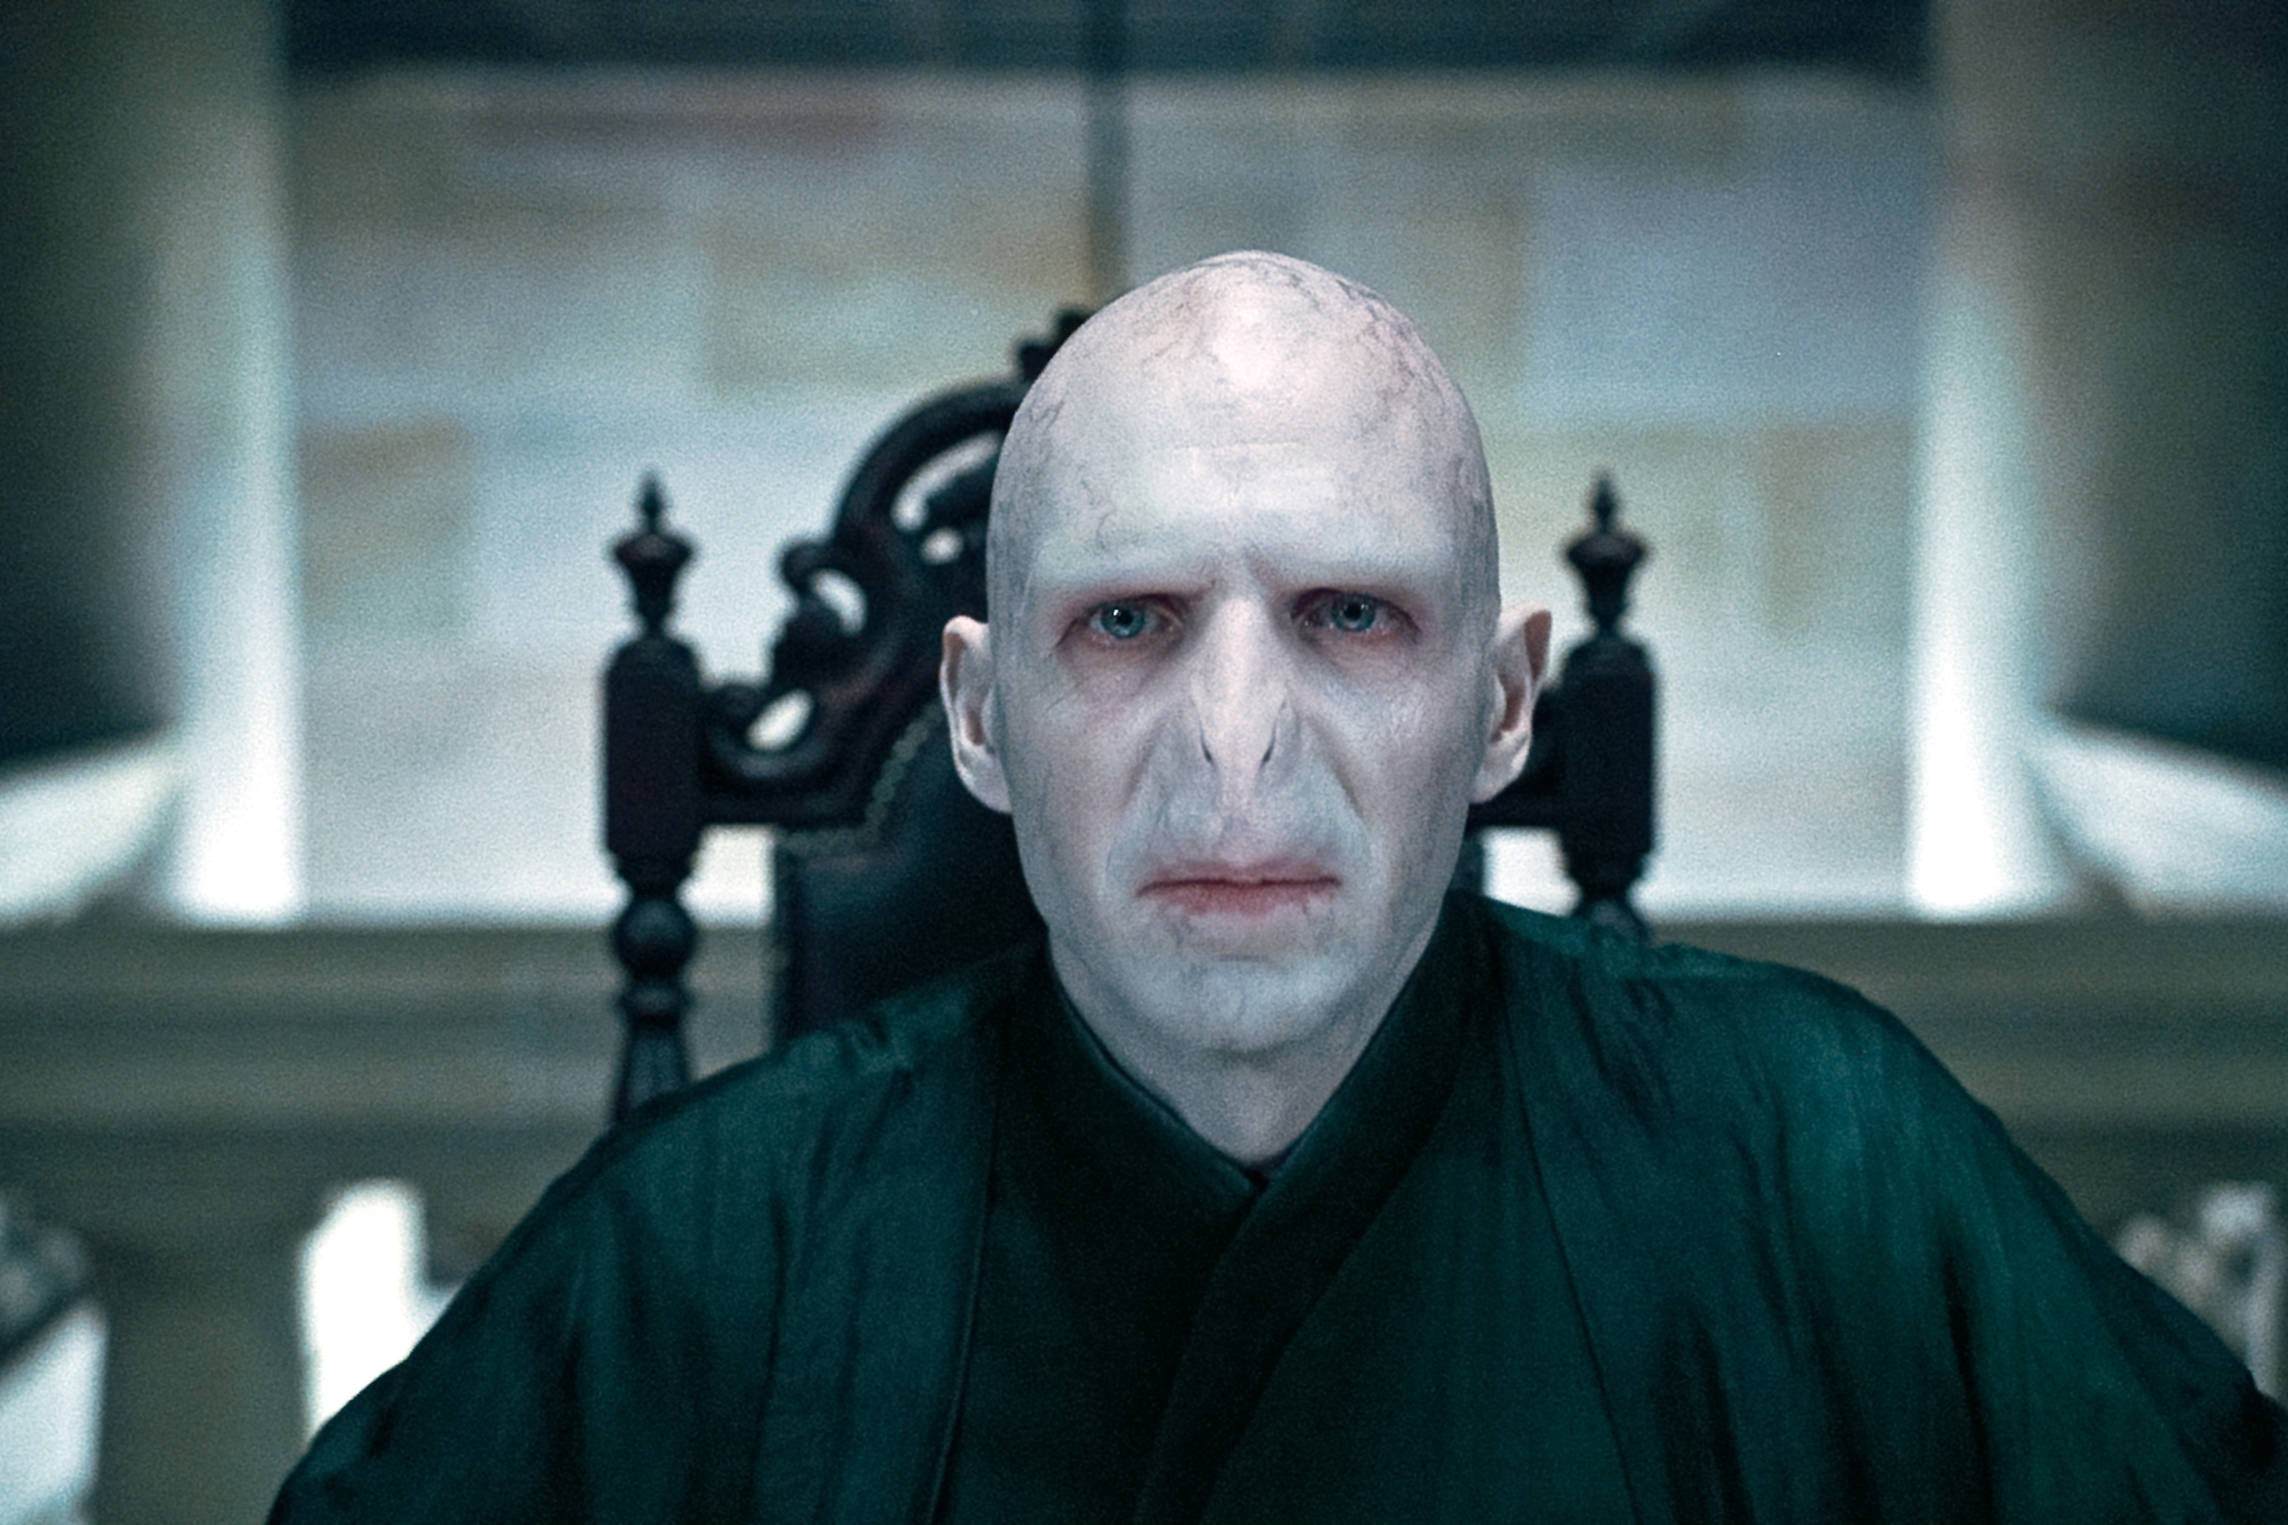 You Won't Believe What Voldemort's Feet Look Like!